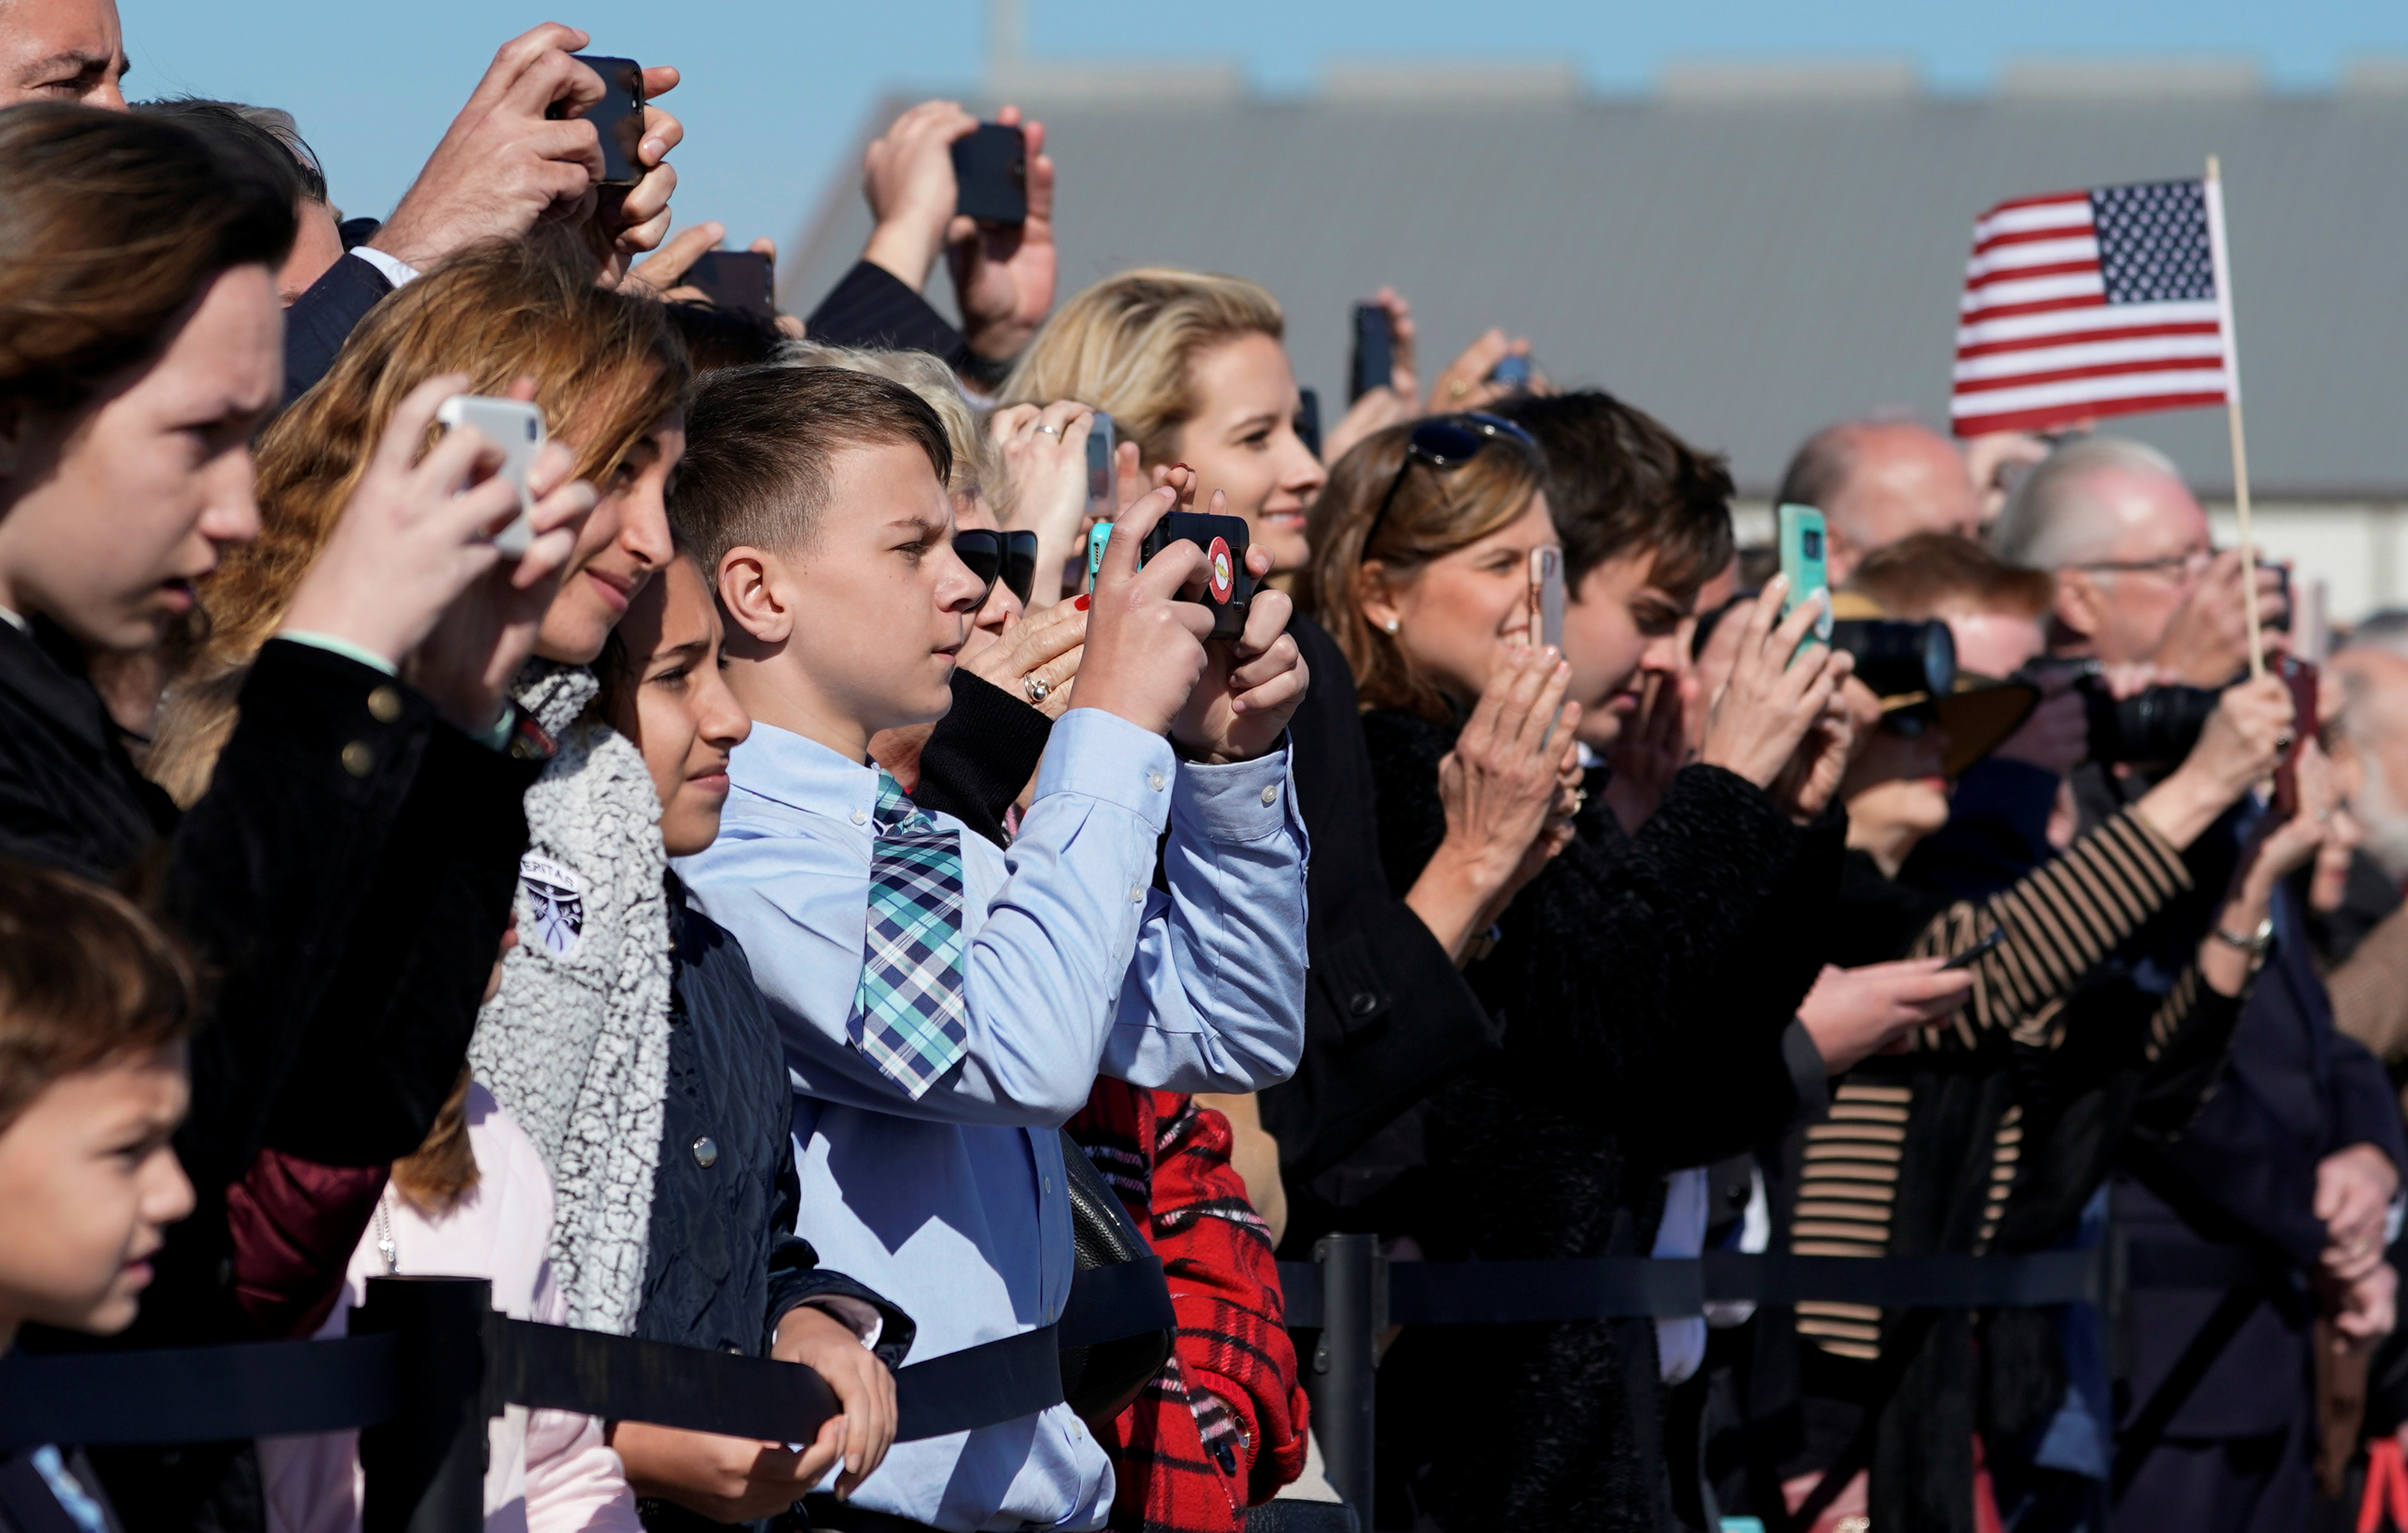 People watch the departure ceremony for the late former U.S. President George H.W. Bush at Ellington Field in Houston, Texas, U.S., December 3, 2018. (David J. Phillip/Pool via REUTERS)